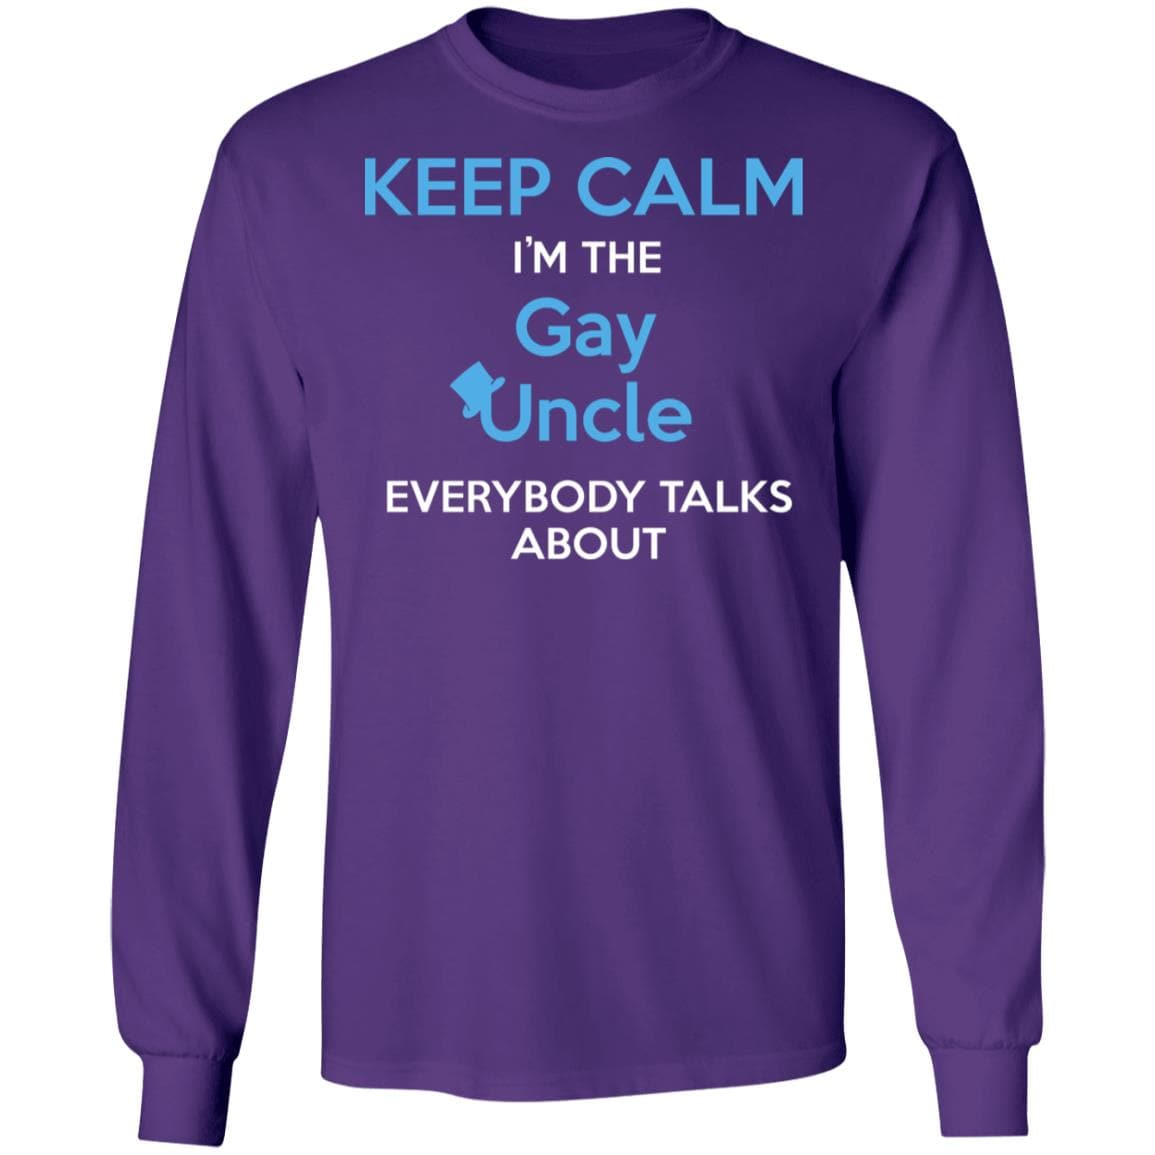 Keep Calm I'm The Gay Uncle Everybody Talks About Shirt - PrideBooth